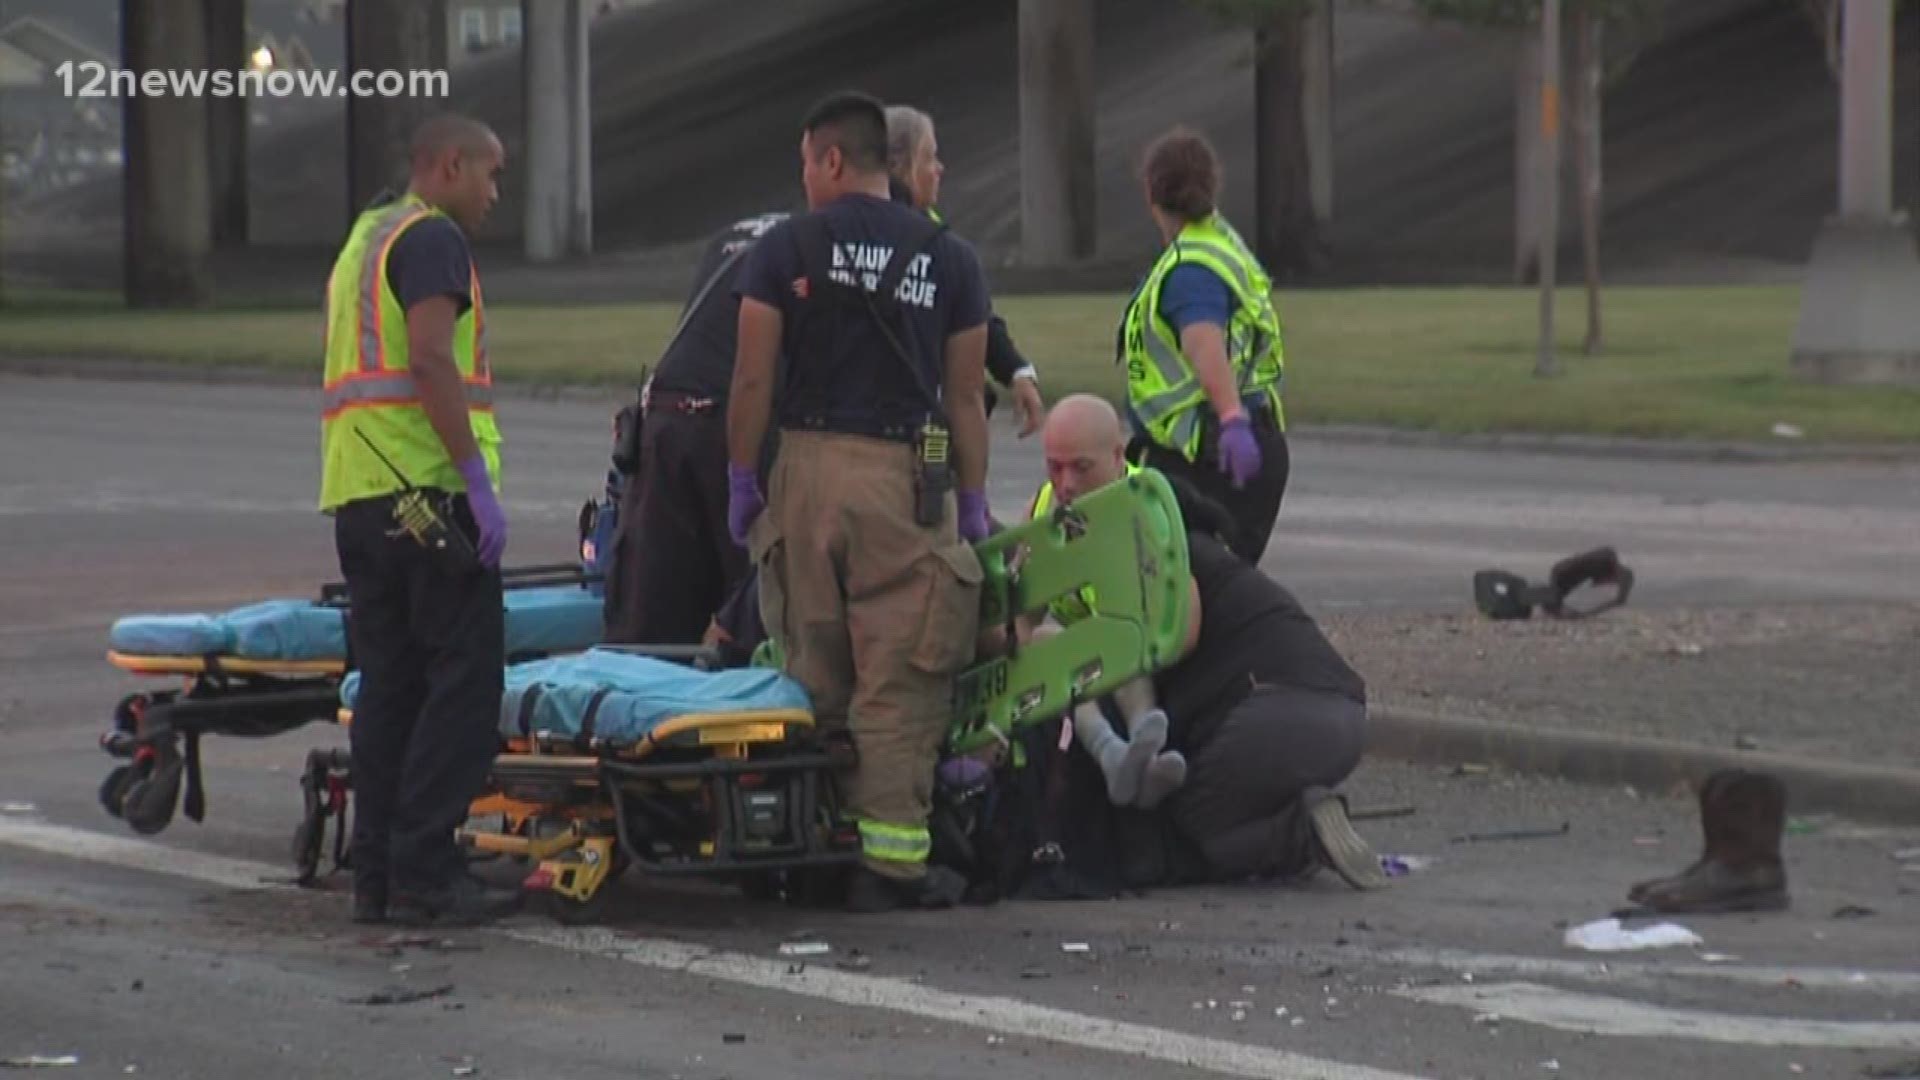 The man says he is going to be okay after being struck by a vehicle Tuesday morning.